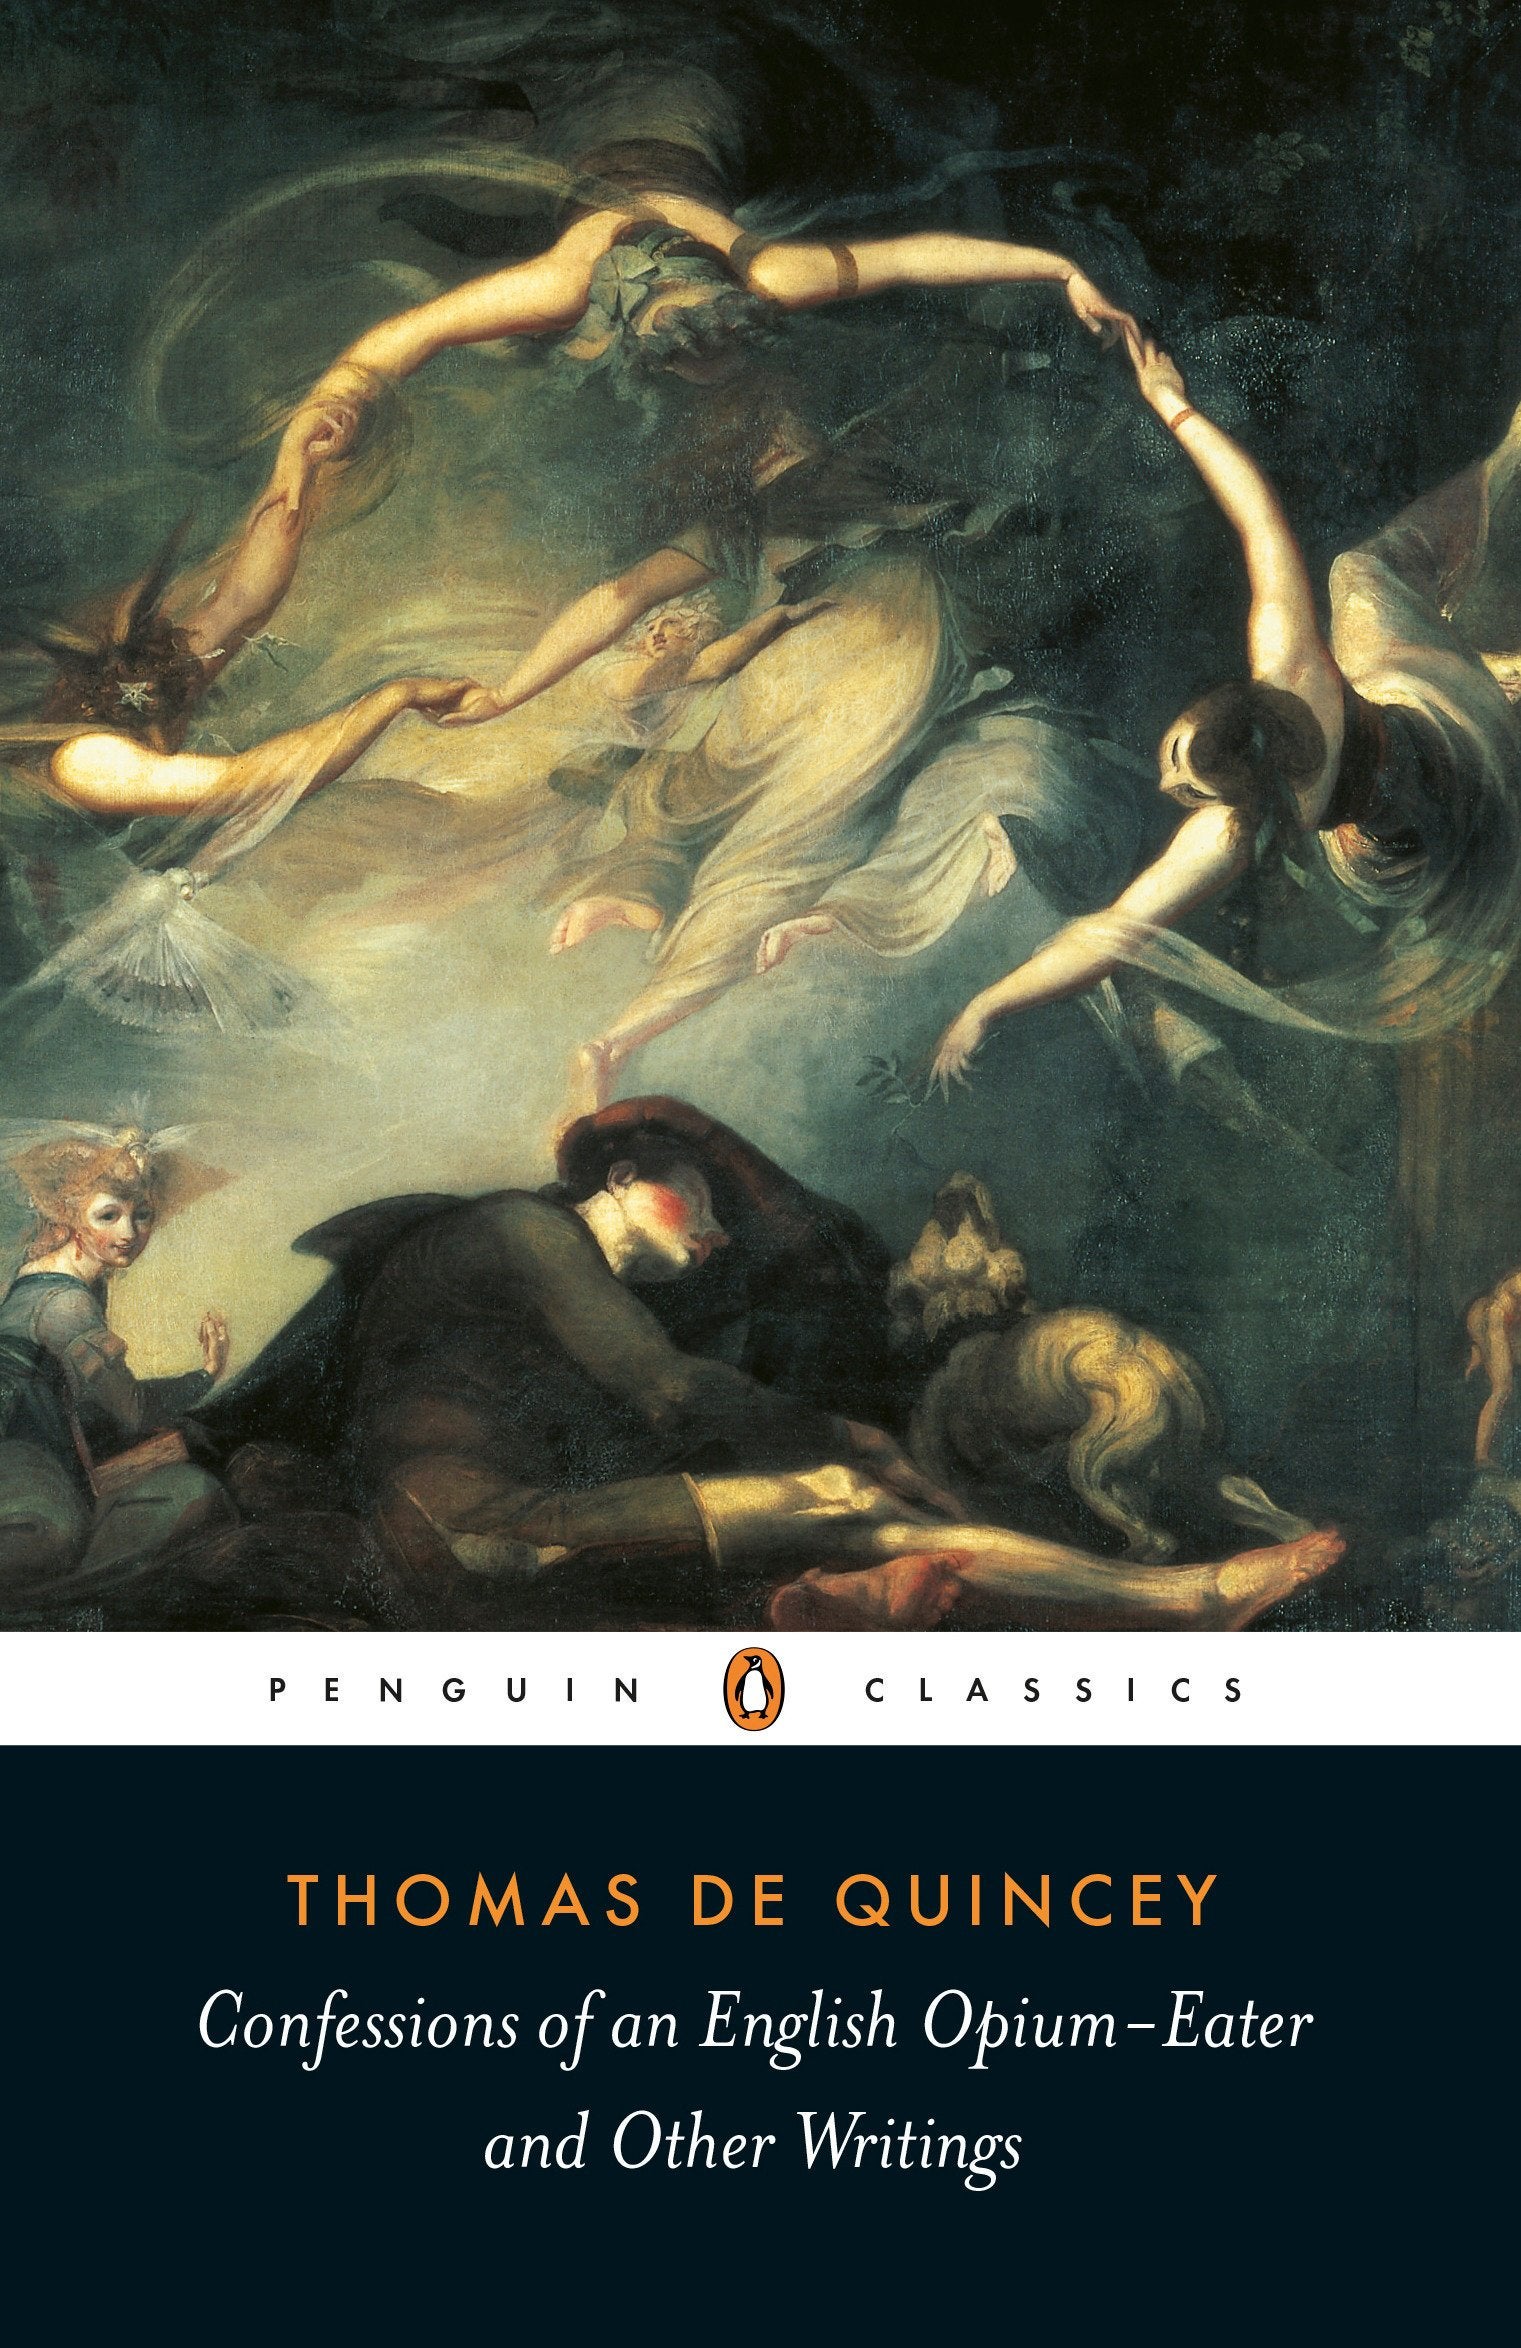 Opium　English　Thomas　Bookseller　of　Classics)　DeQuincey,　Sam　Eater　Read　Confessions　(ed.　an　Milligan)　(Penguin　Barry　Online　Shop